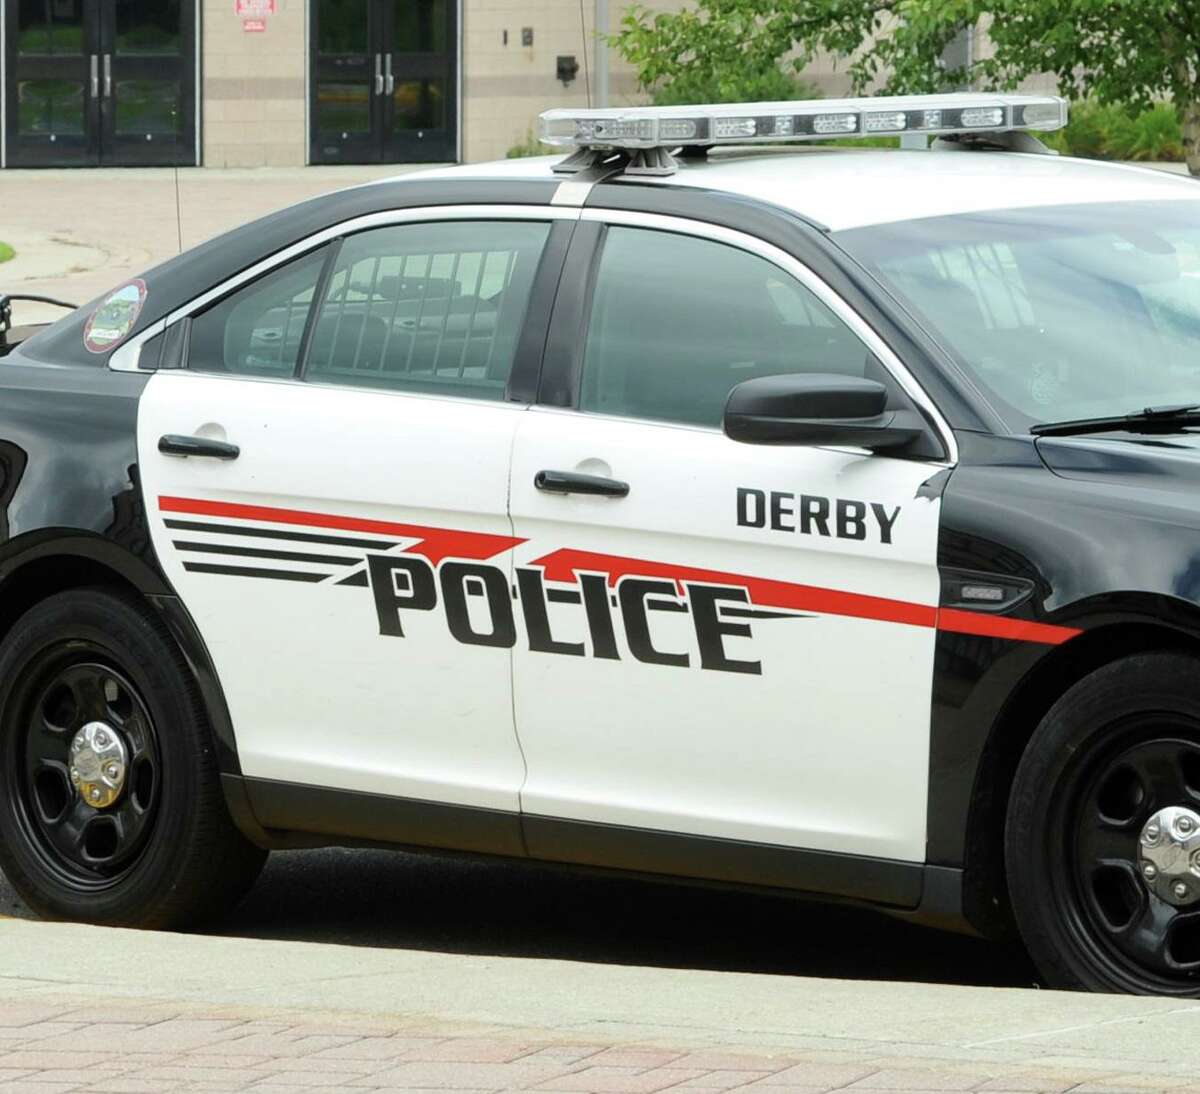 Derby police carin Derby, Conn. on Monday August 20, 2018.